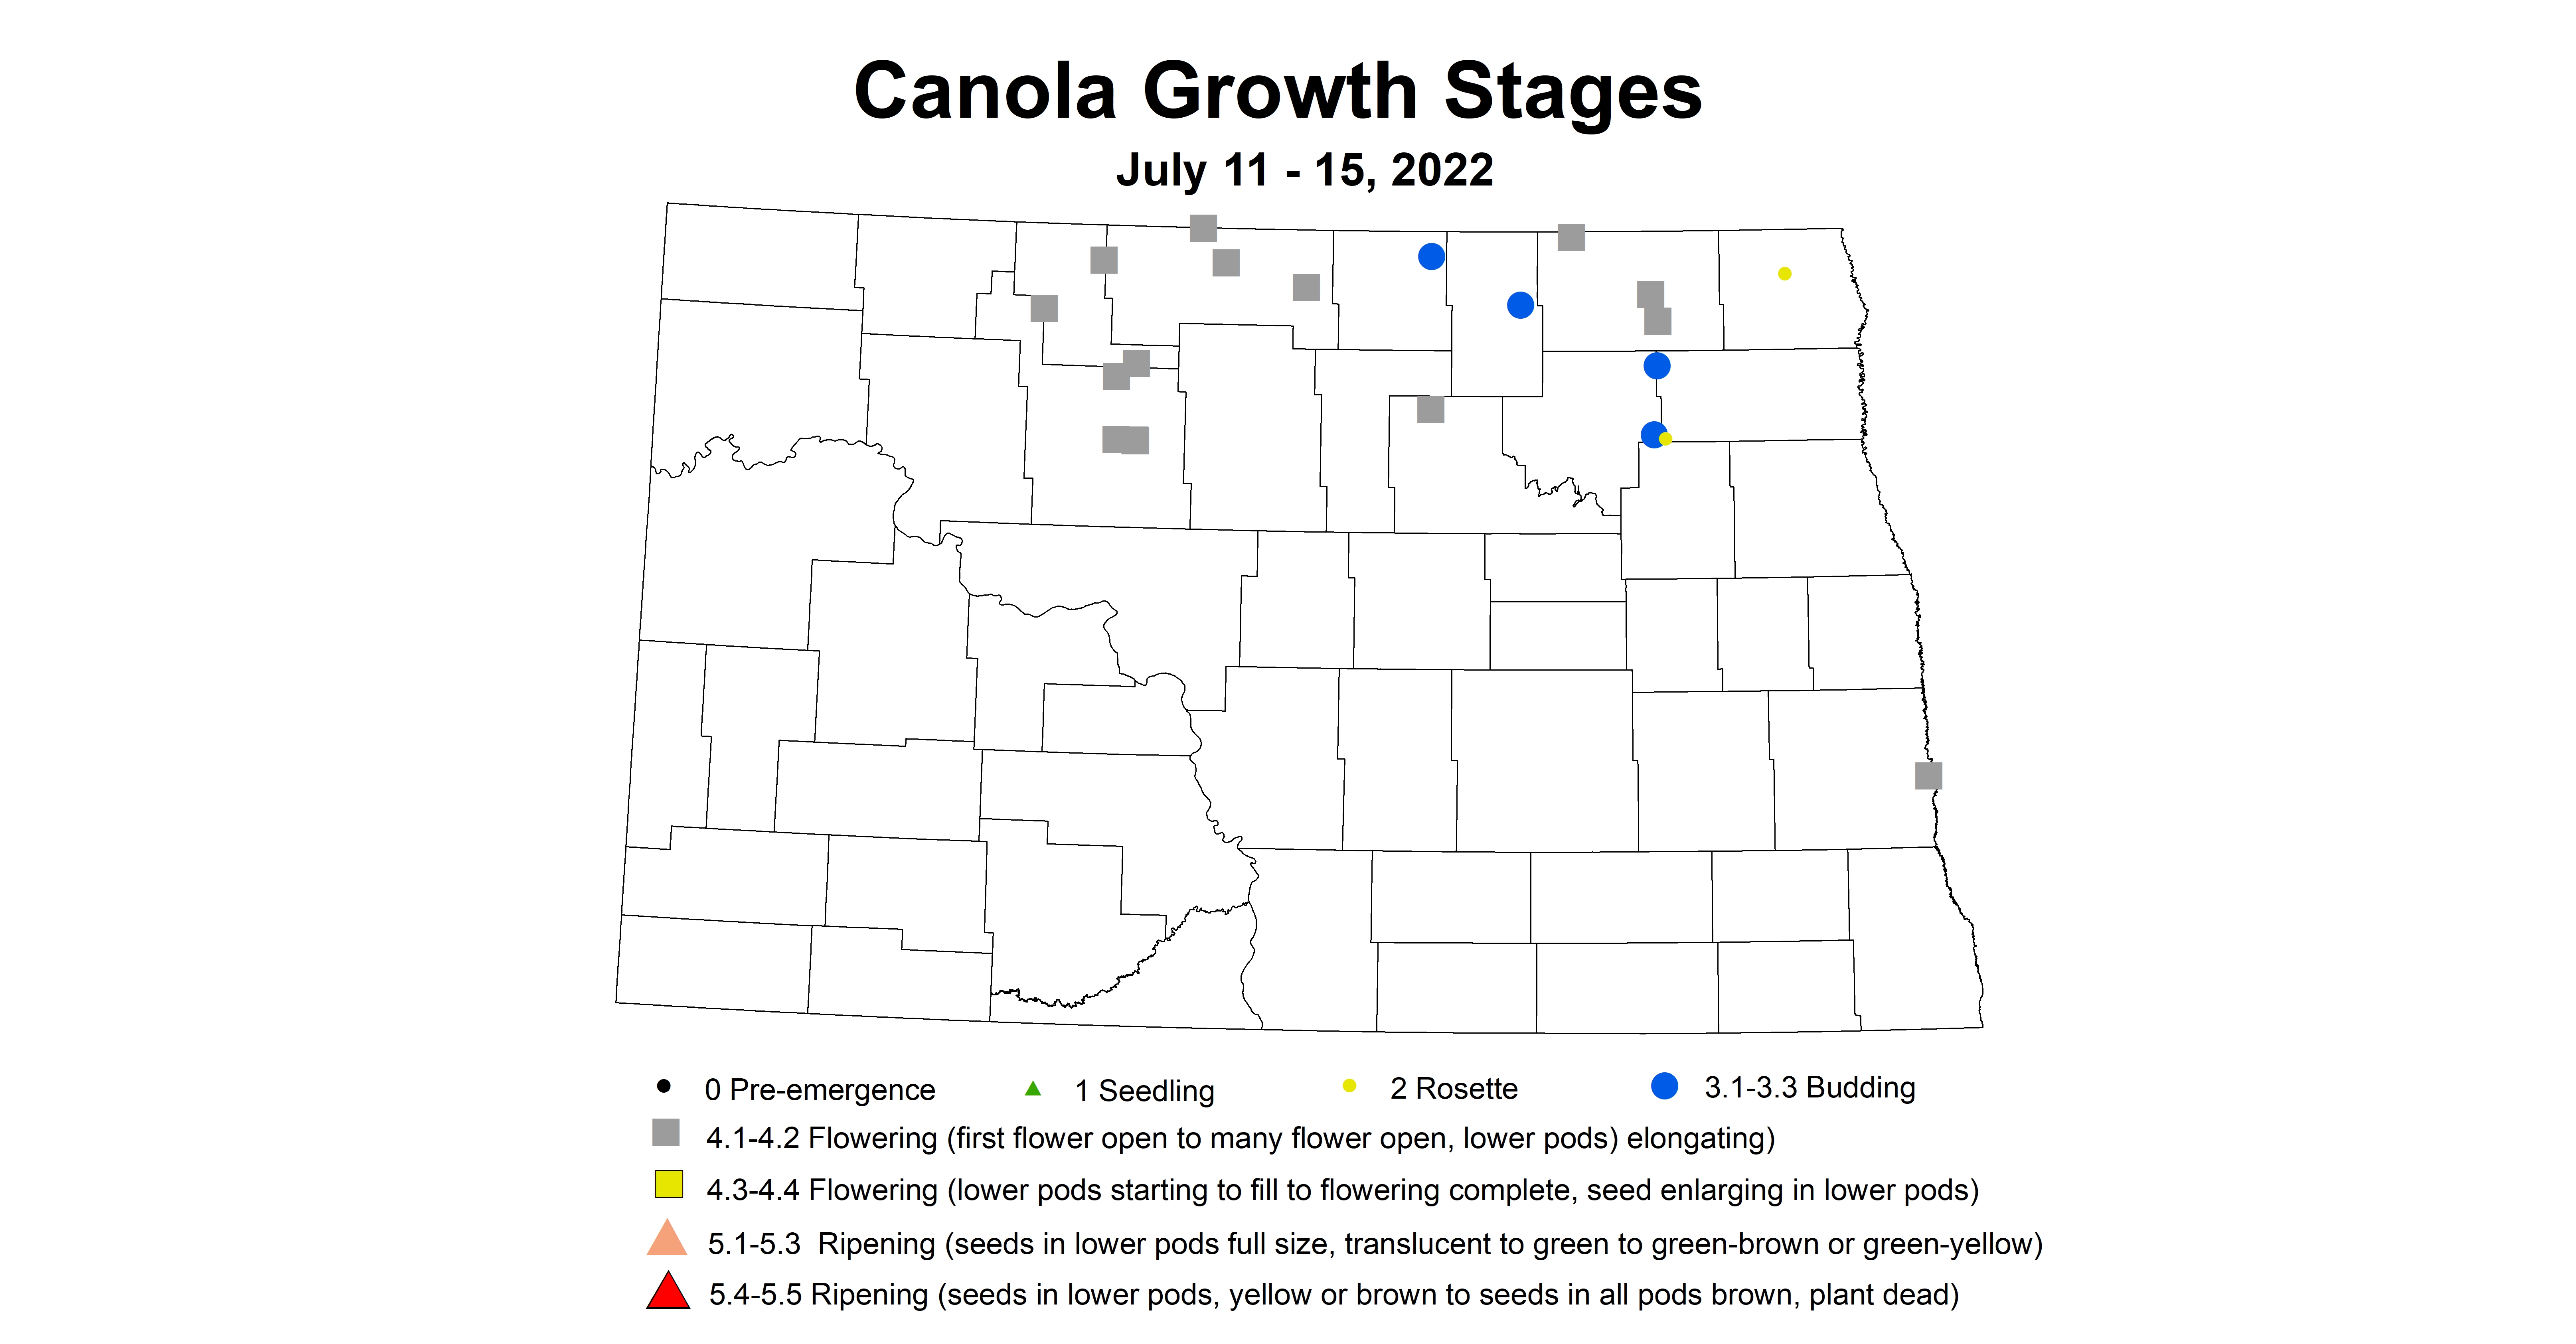 canola growth stages 2022 7.11-7.15